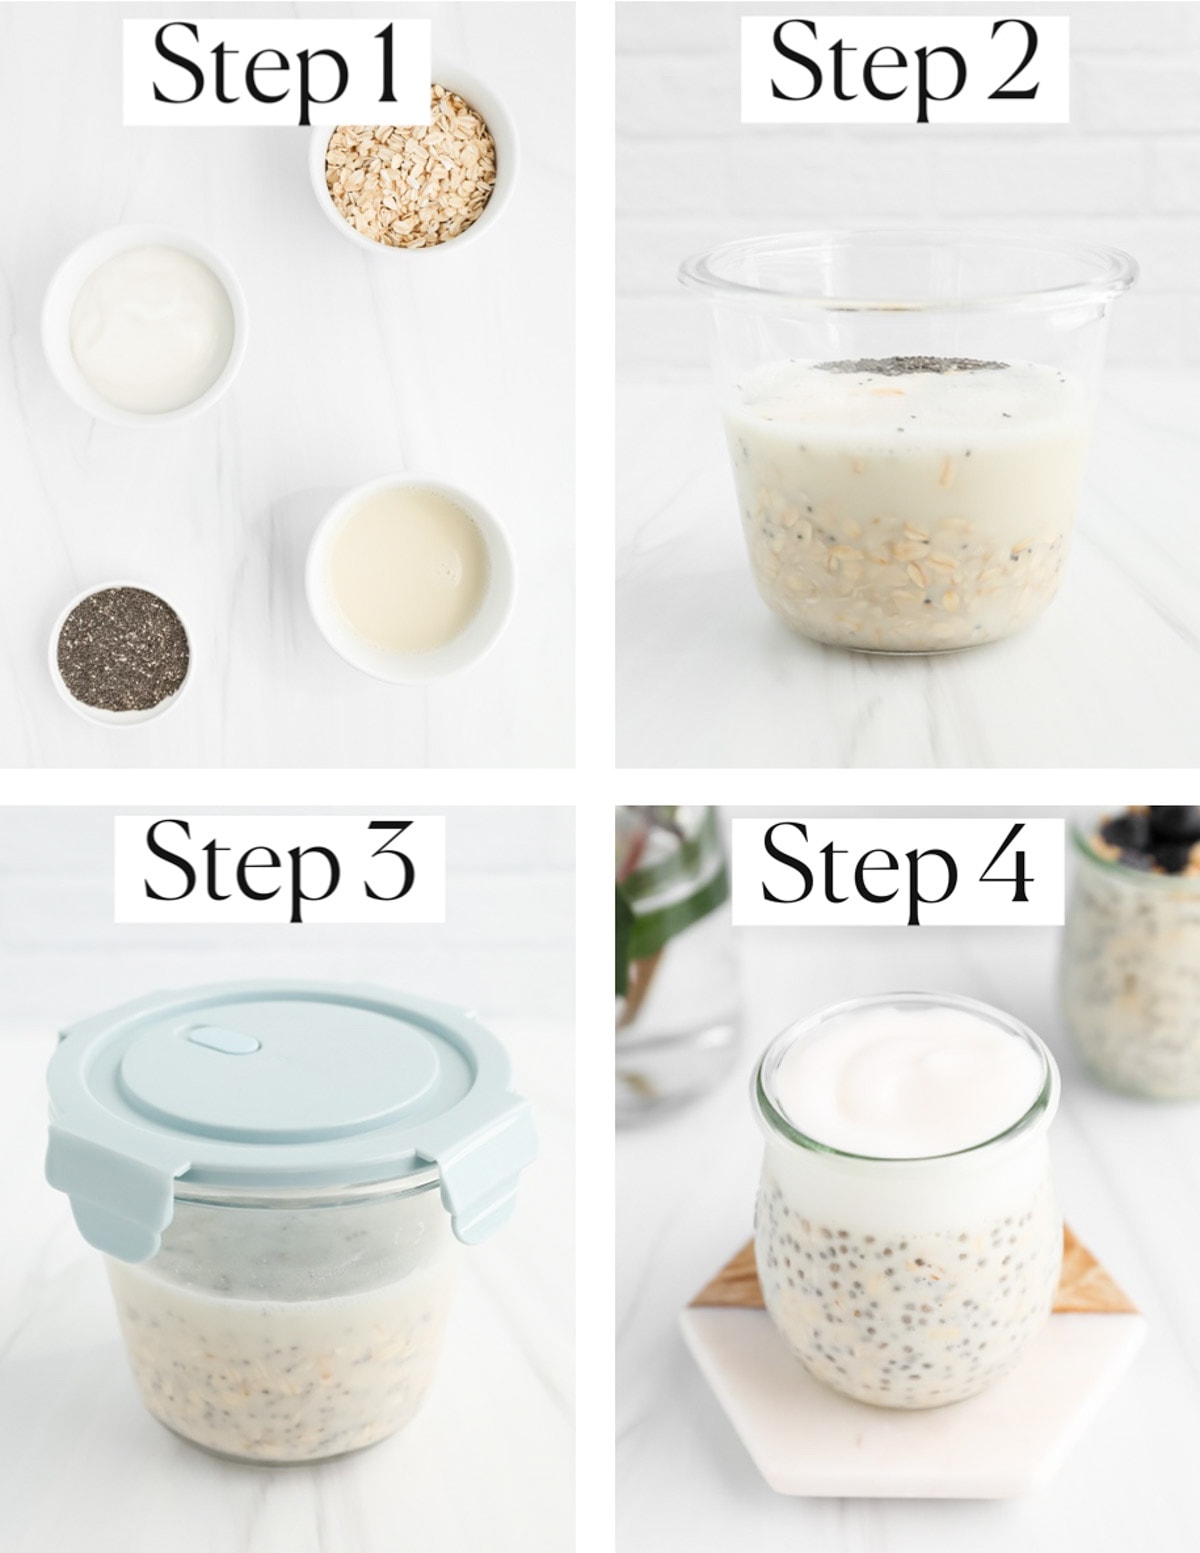 A collage of four images labeled "step 1-step 4". Step 1: oats, yogurt, milk, and chia seeds in small white bowls. Step 2: a clear glass jar filled with oats, chia seeds, and oat milk. Step 3: the glass jar with the oats, milk, and chia seeds is stirred and has a blue top on. Step 4: Finished overnight oats in a jar with a layer of vanilla yogurt on top.